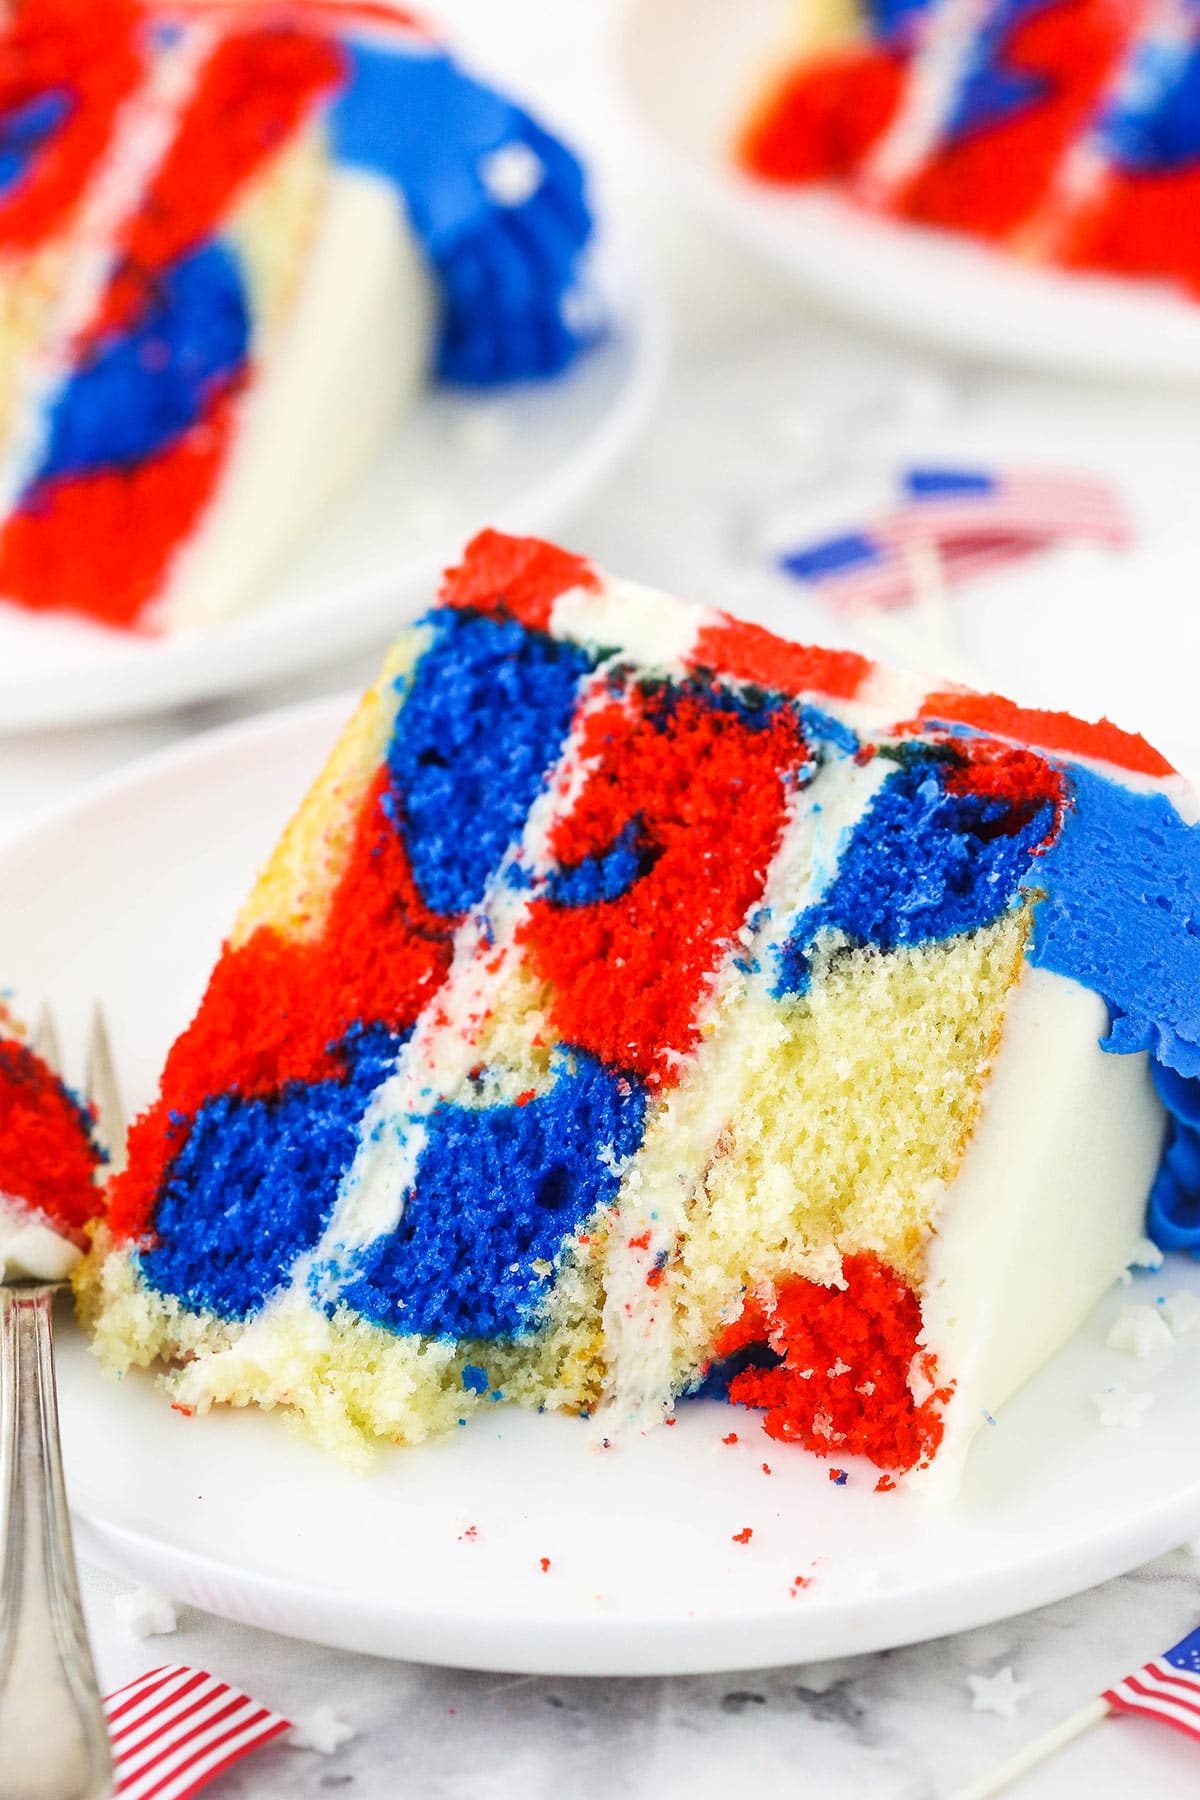 A slice of red, white and blue cake on a plate with a few bites taken out